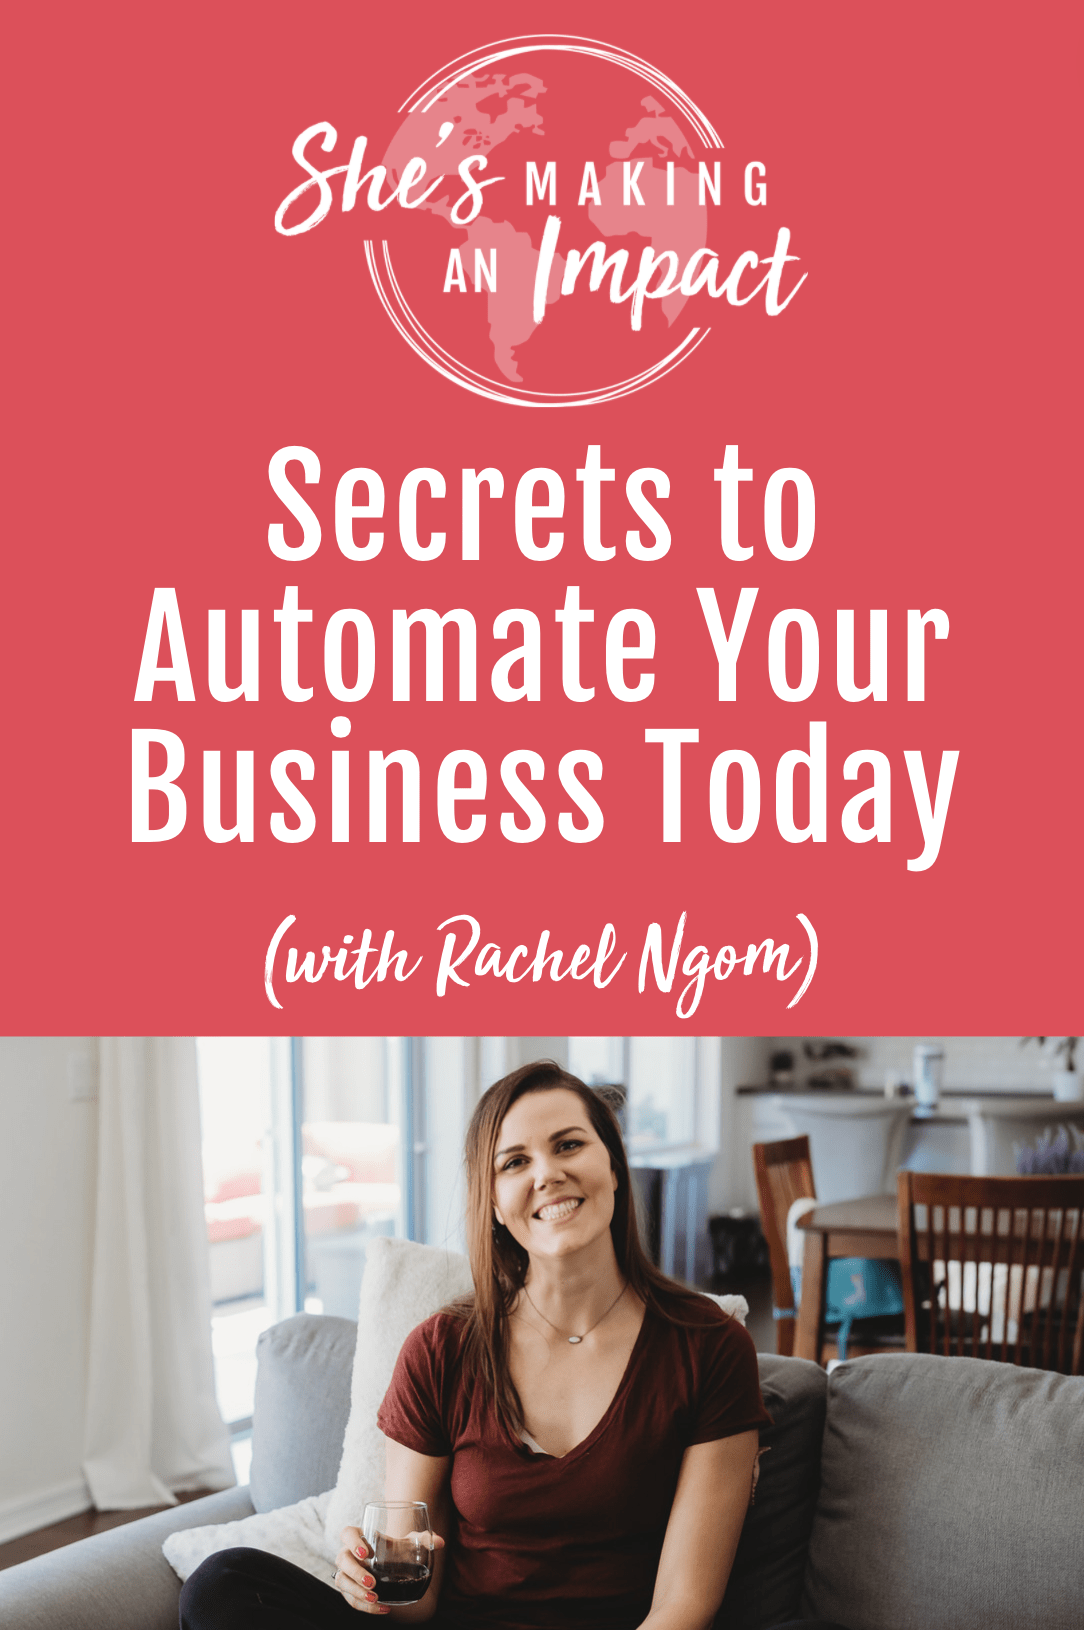 Secrets to Automate Your Business Today: Episode 317